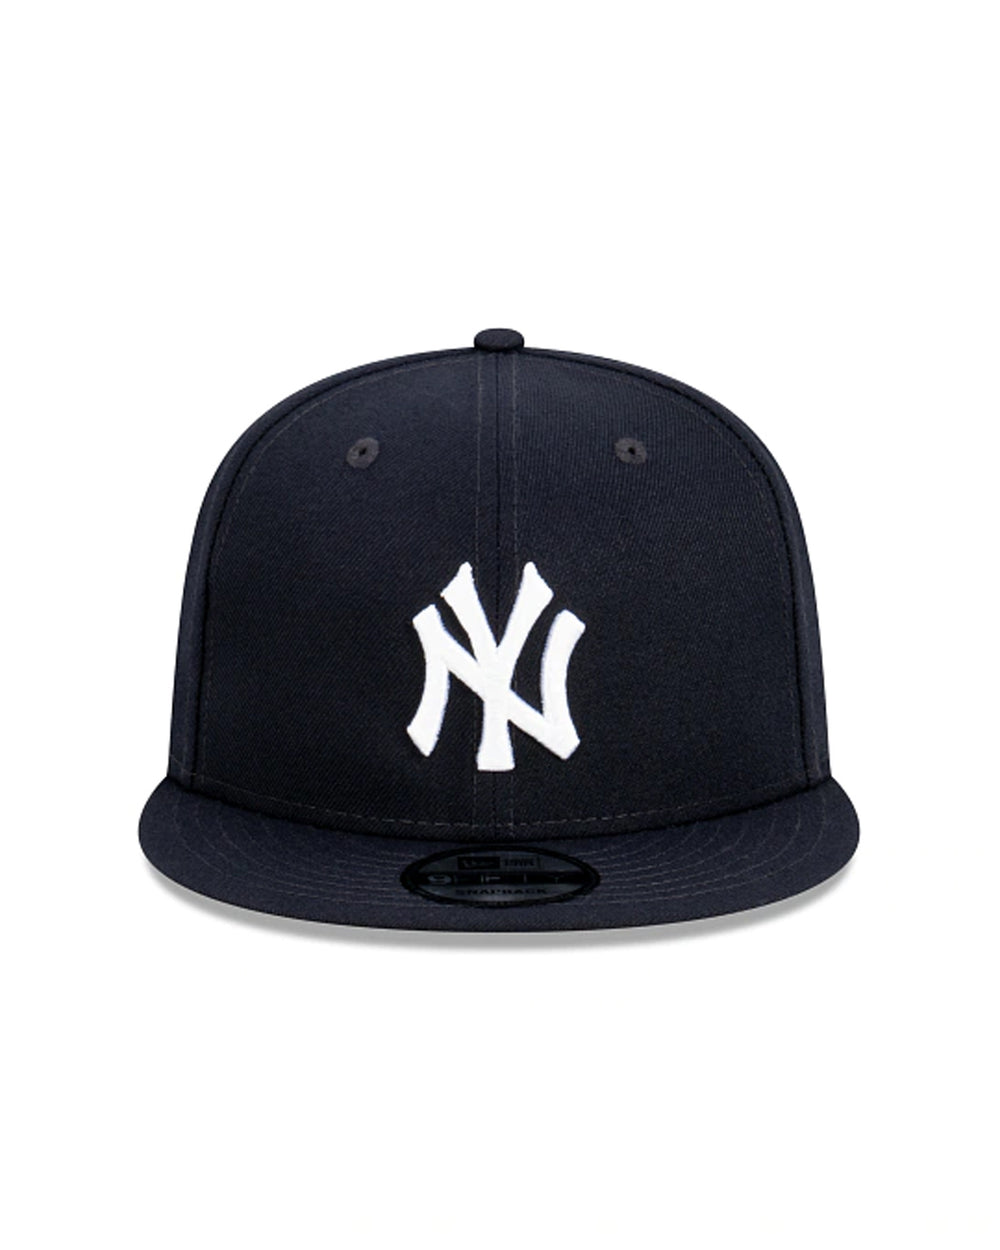 New York Yankees Official Team Colours 9FIFTY Snapback